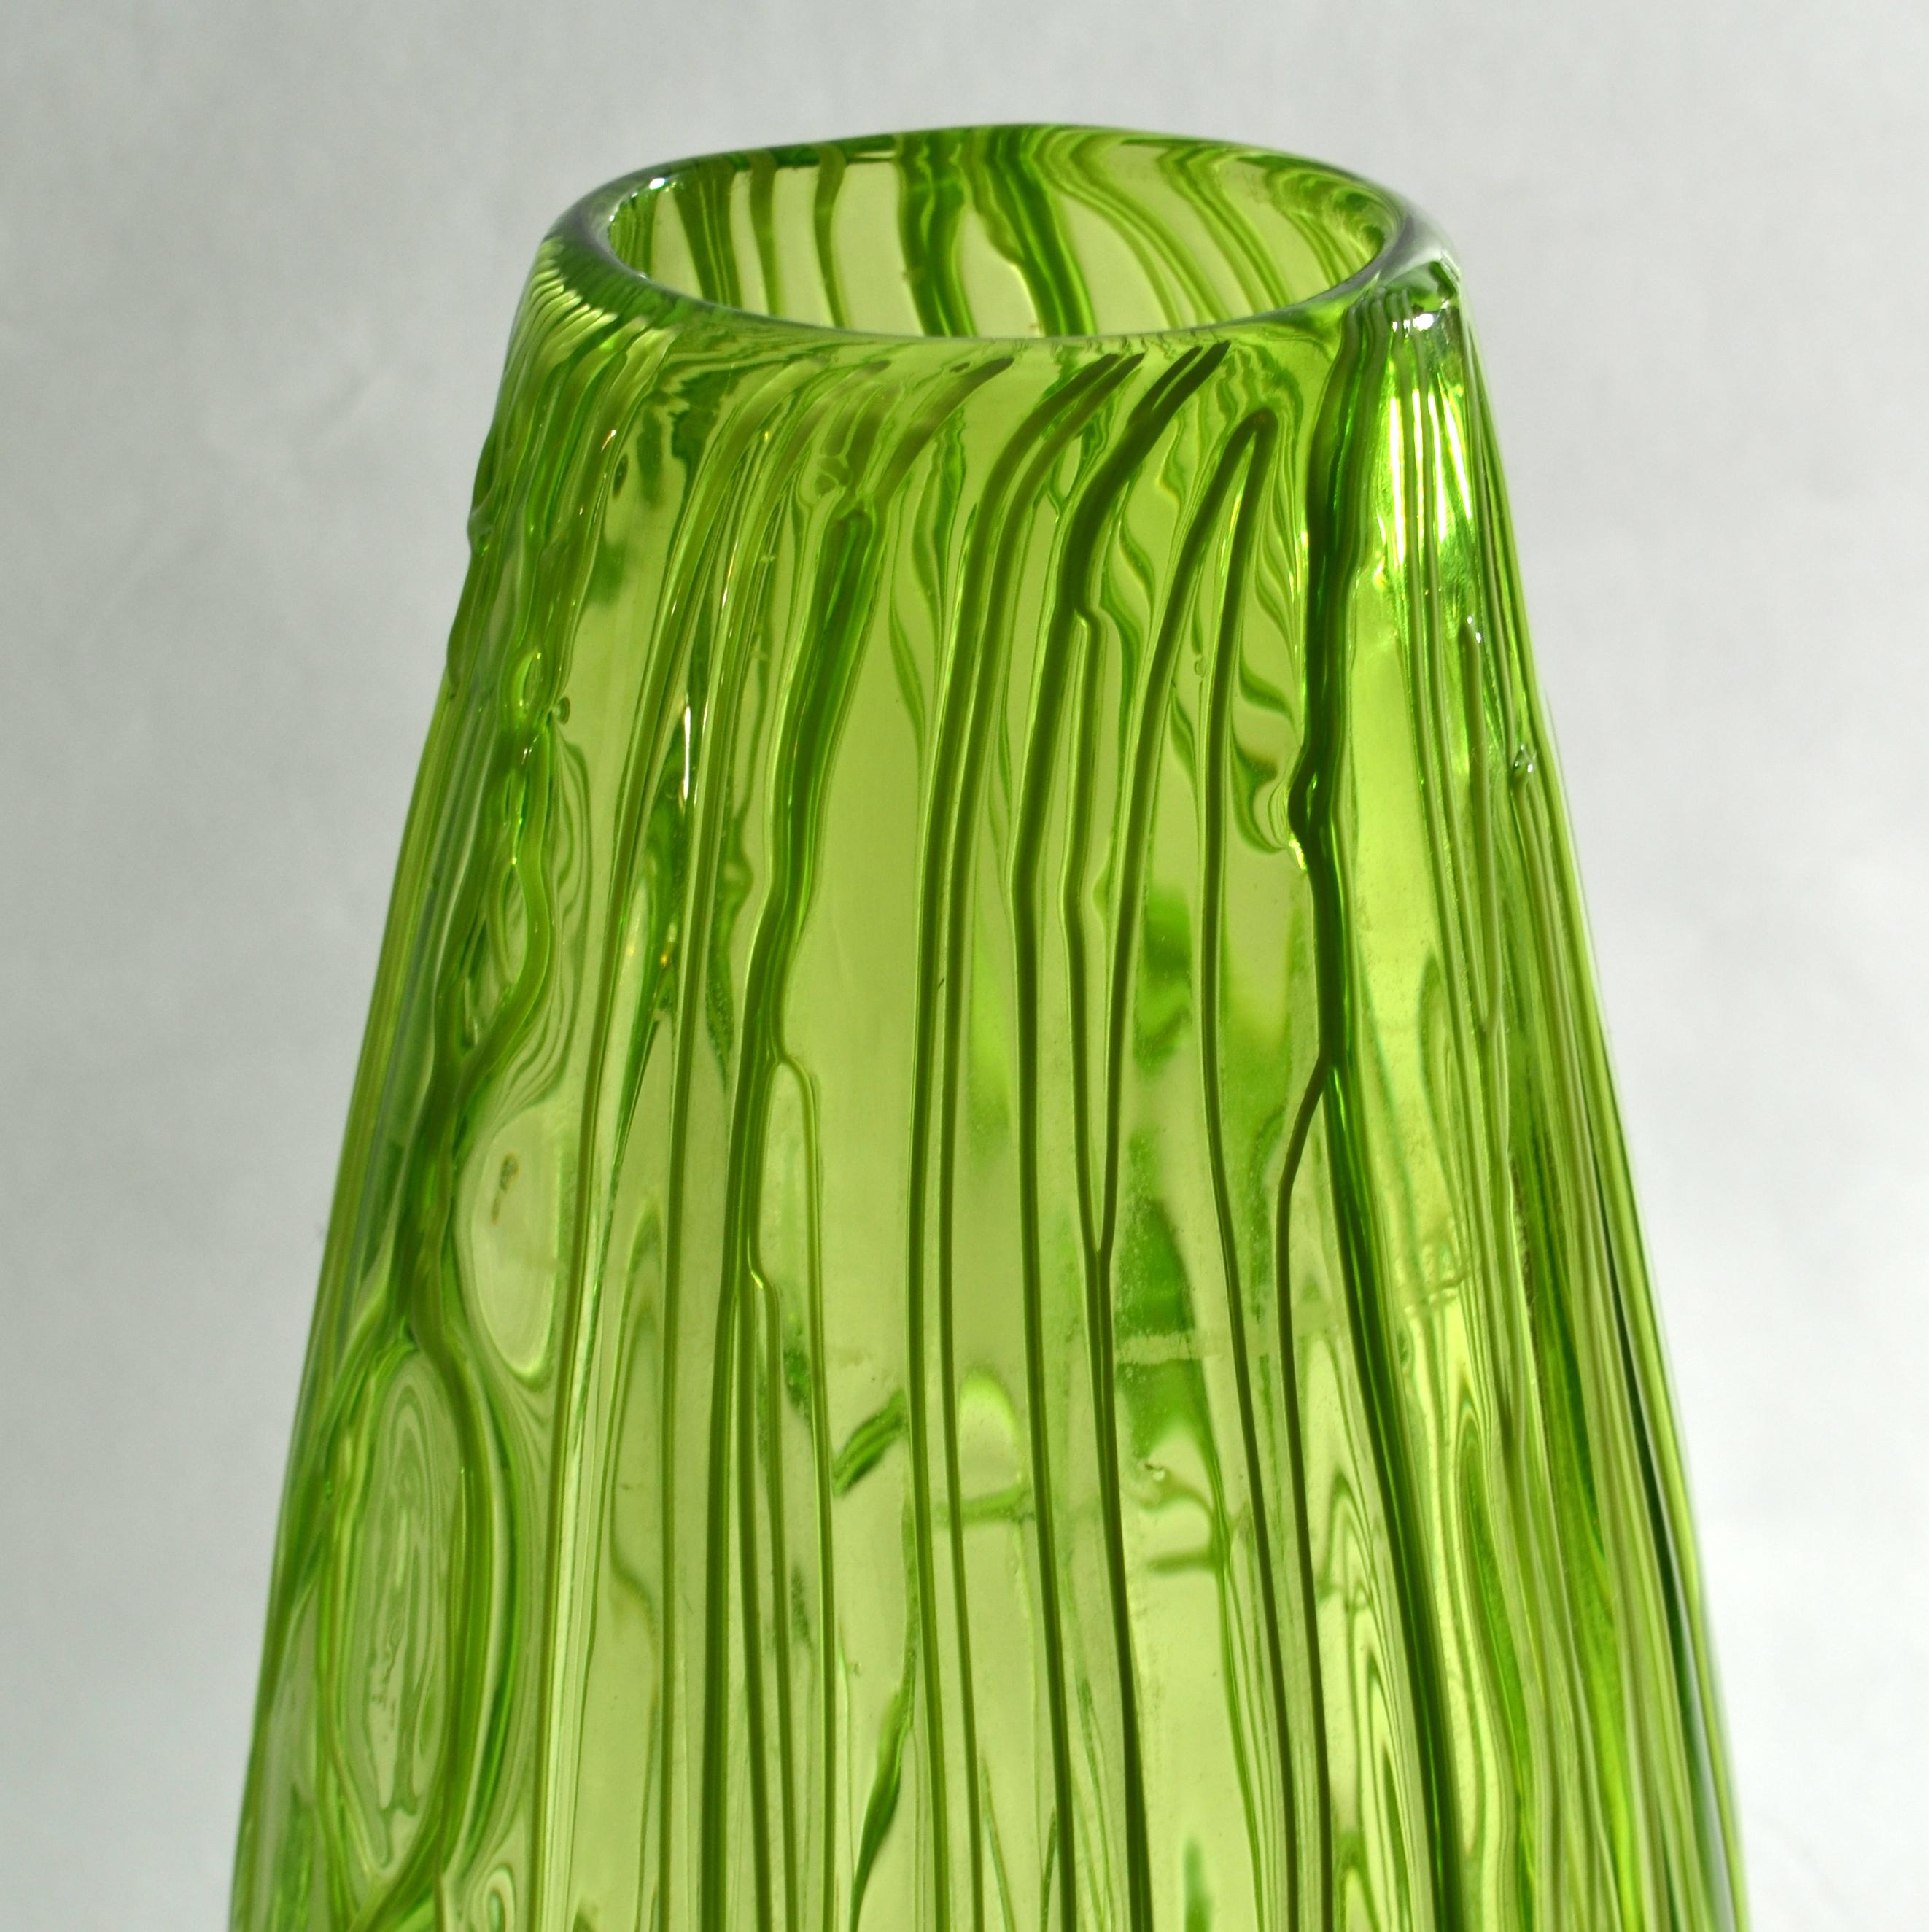 Pair of Hand Blown Glass Acid Green Veined Vases For Sale 4